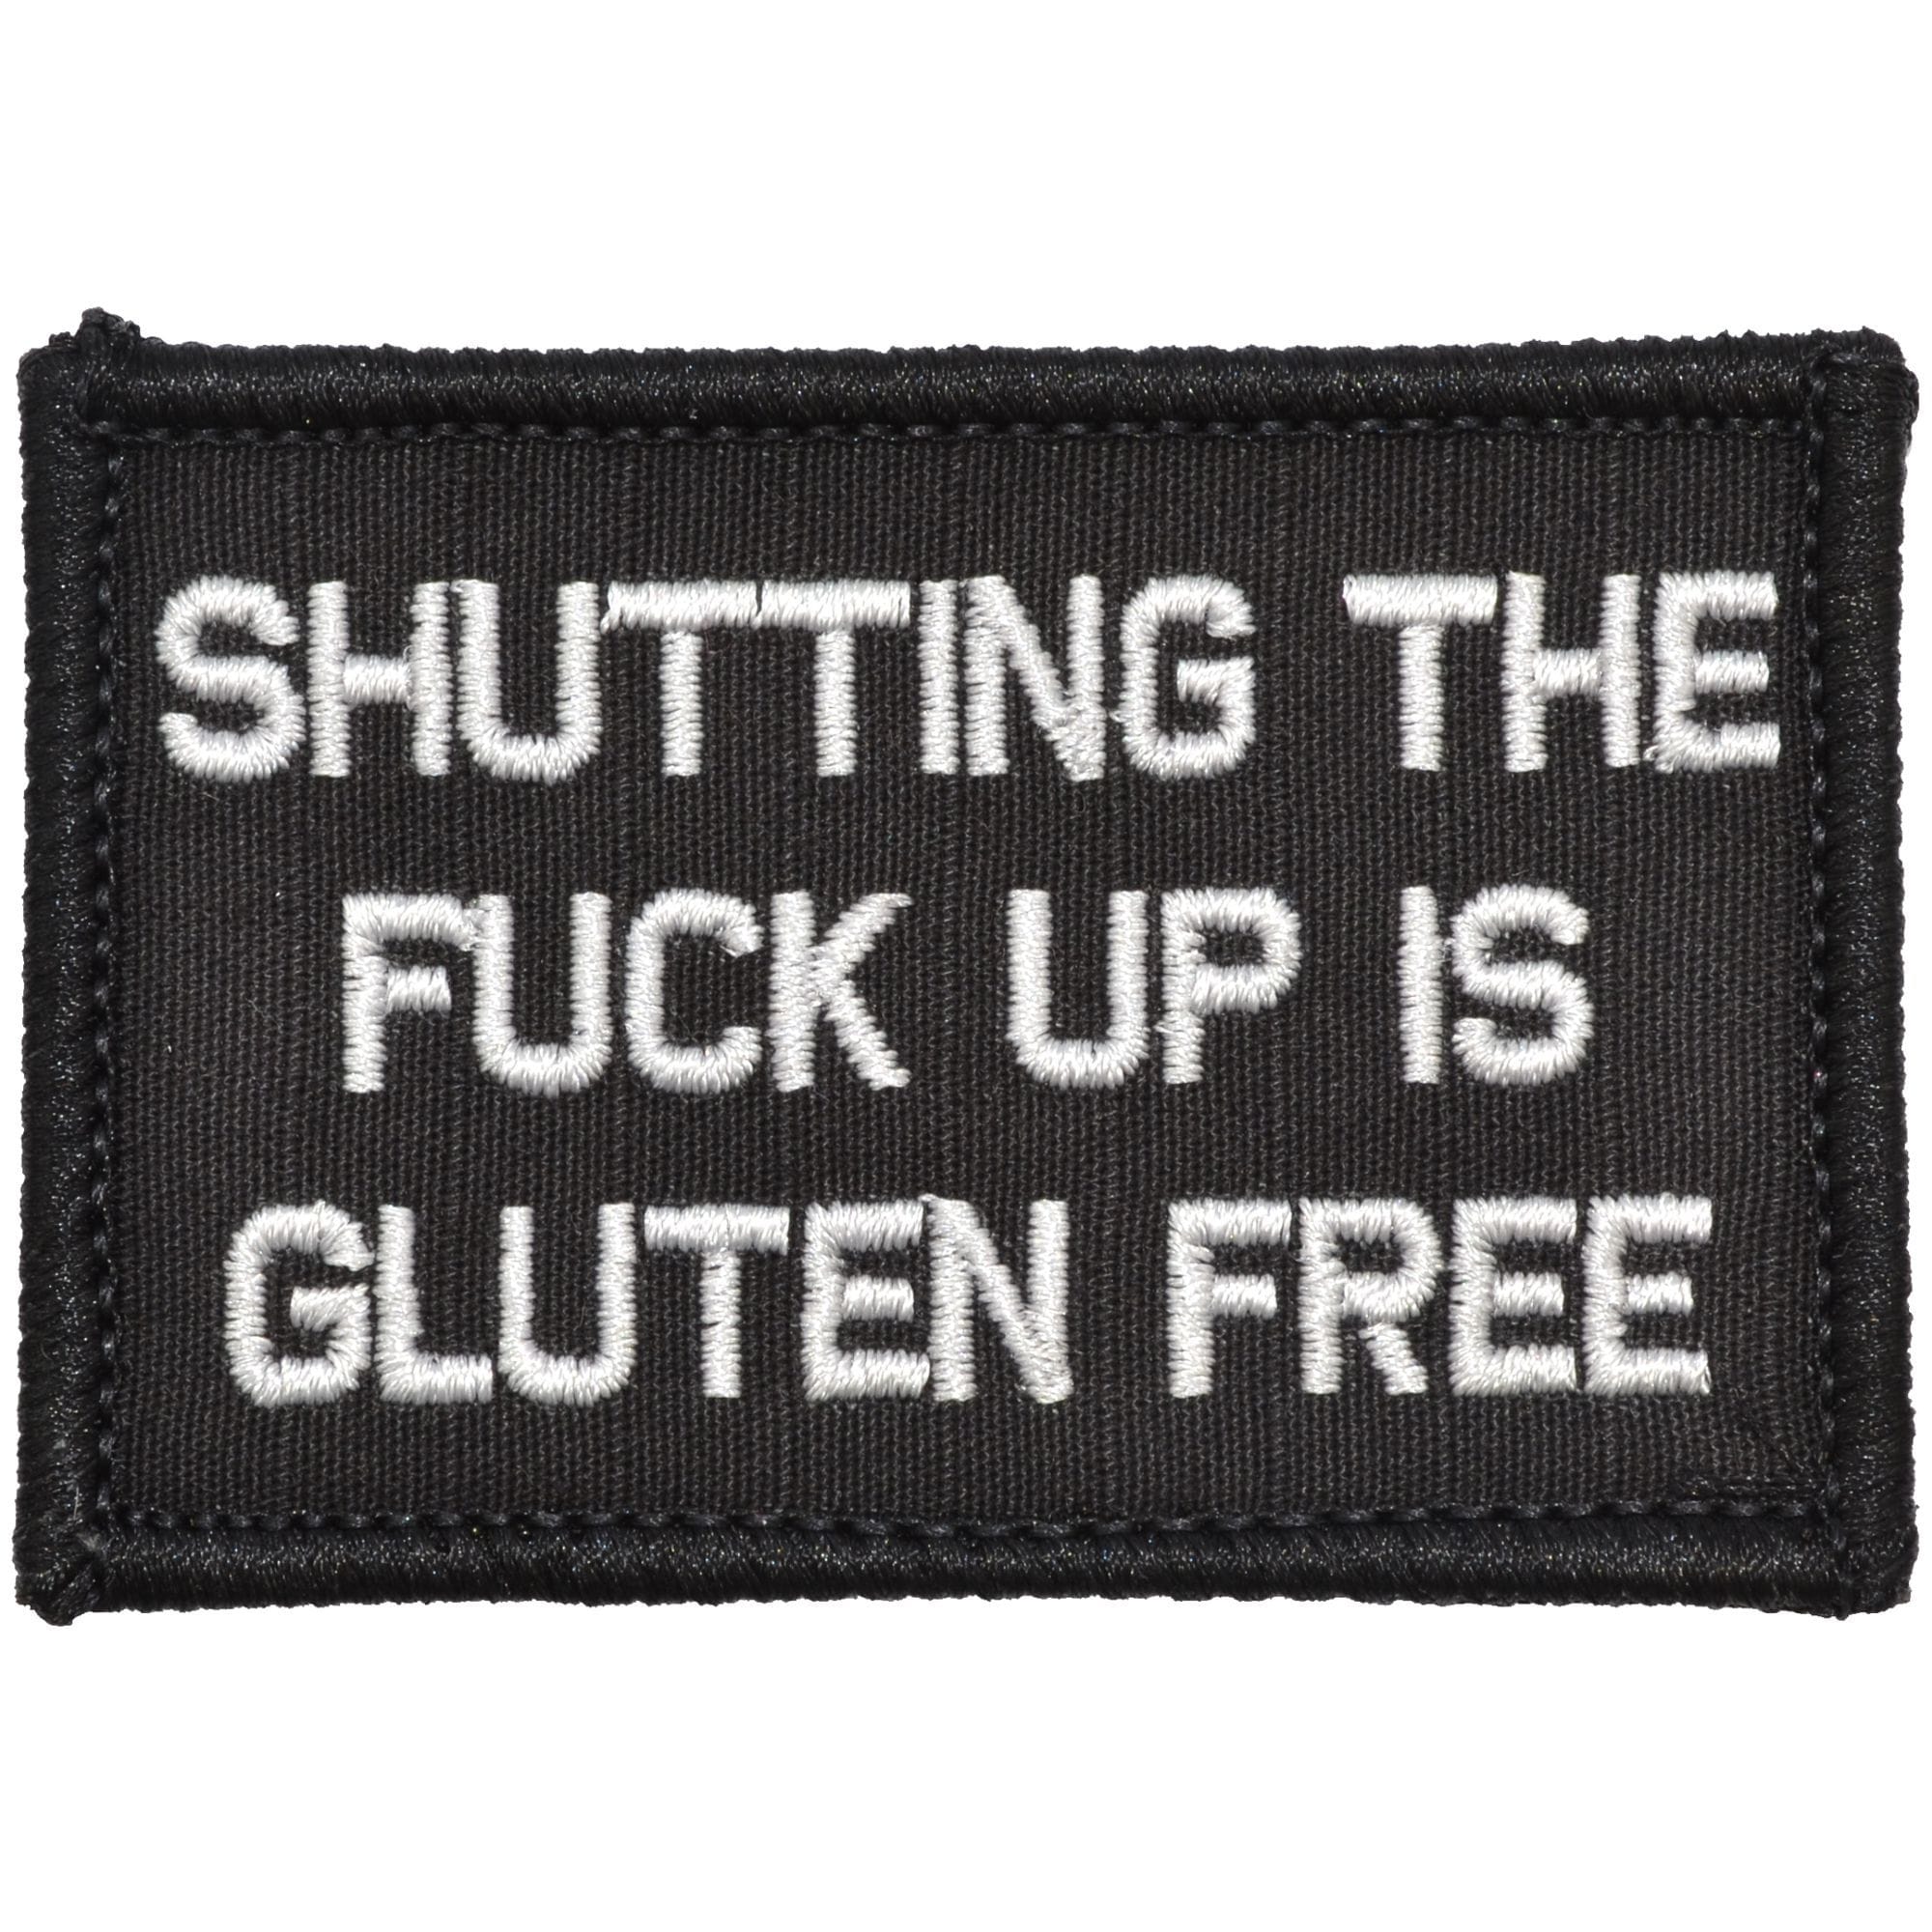 Tactical Gear Junkie Patches Black Shutting The Fuck Up Is Gluten Free - 2x3 Patch